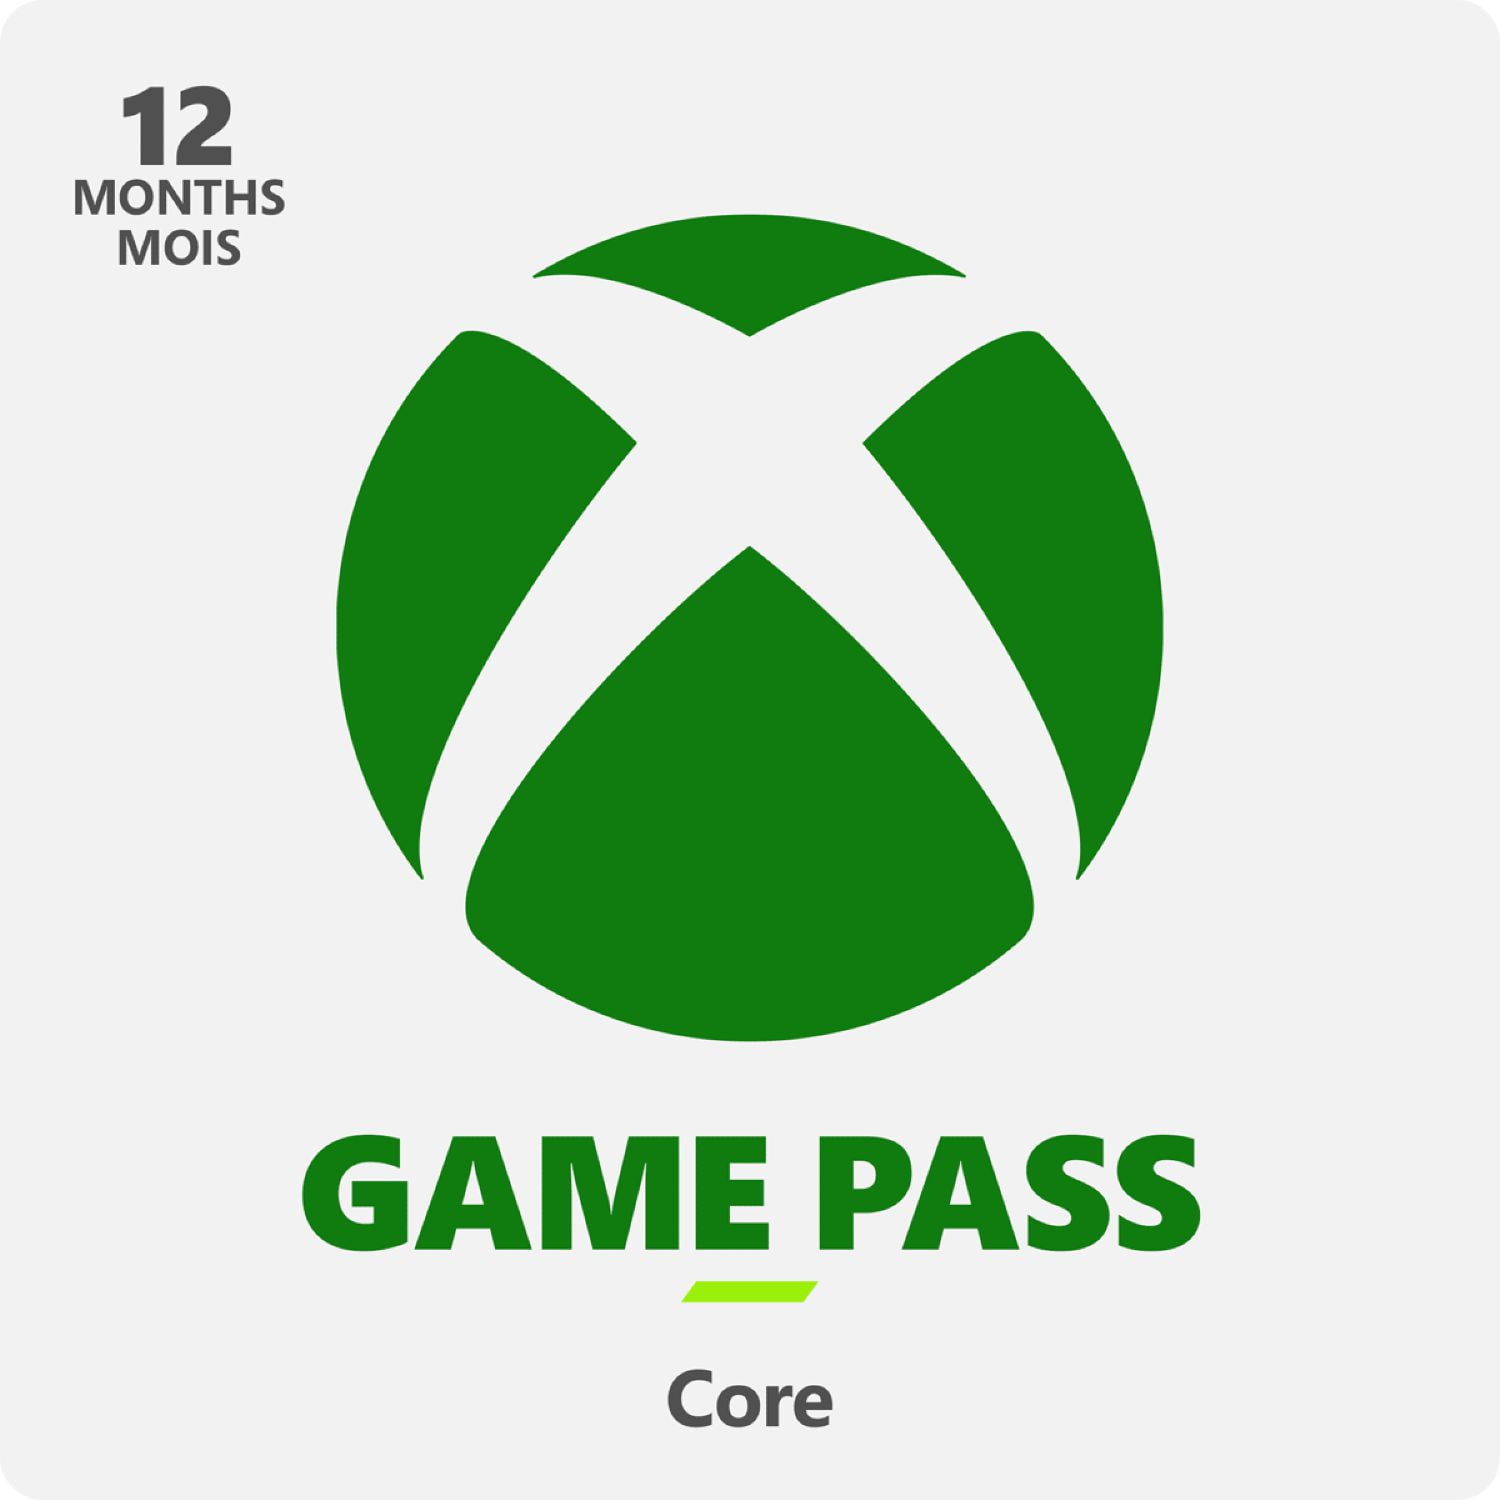 Xbox Game Pass Core - 12 Month 69.99 Gift Card (Digital Code